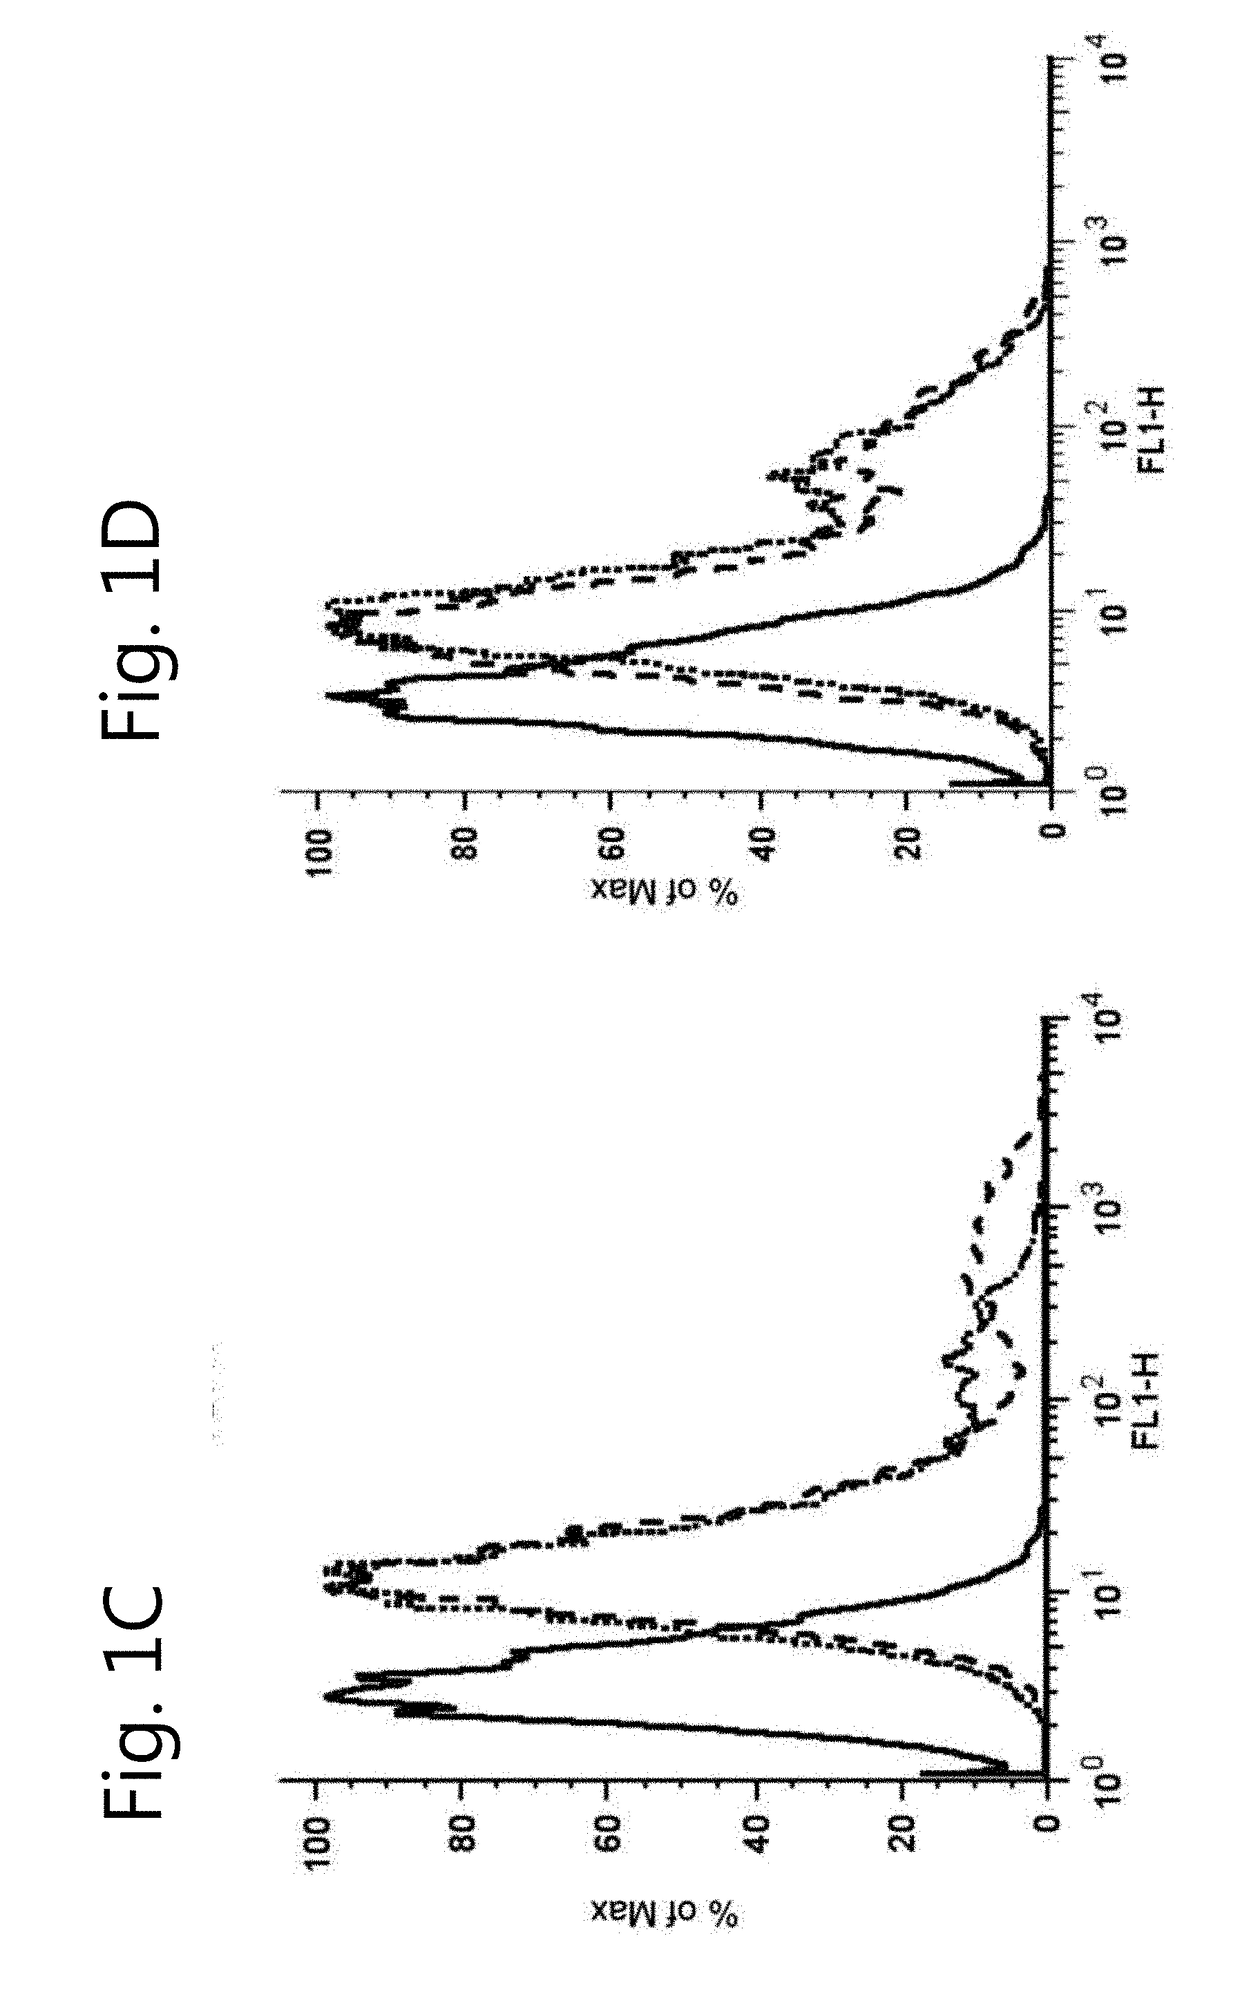 A renal cell line with stable transporter expression